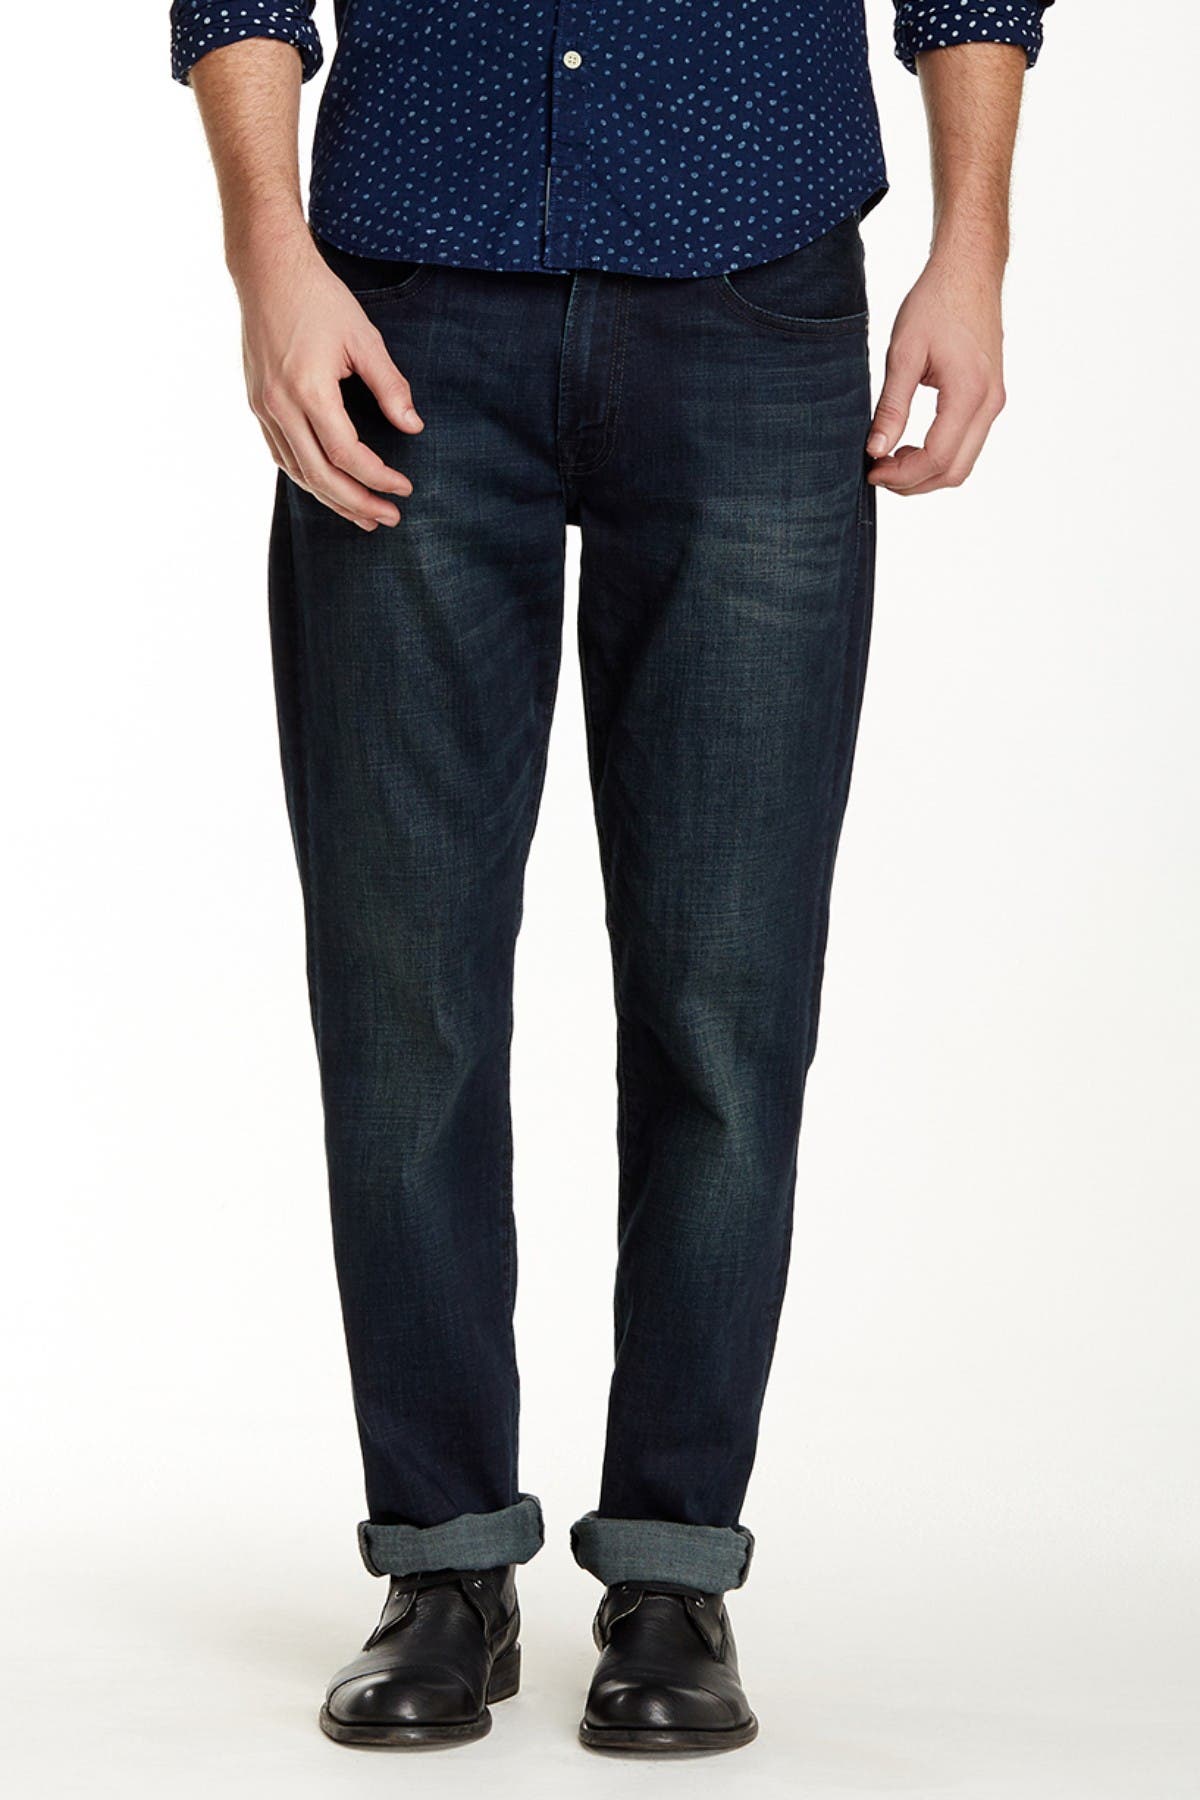 lucky jeans 121 heritage slim